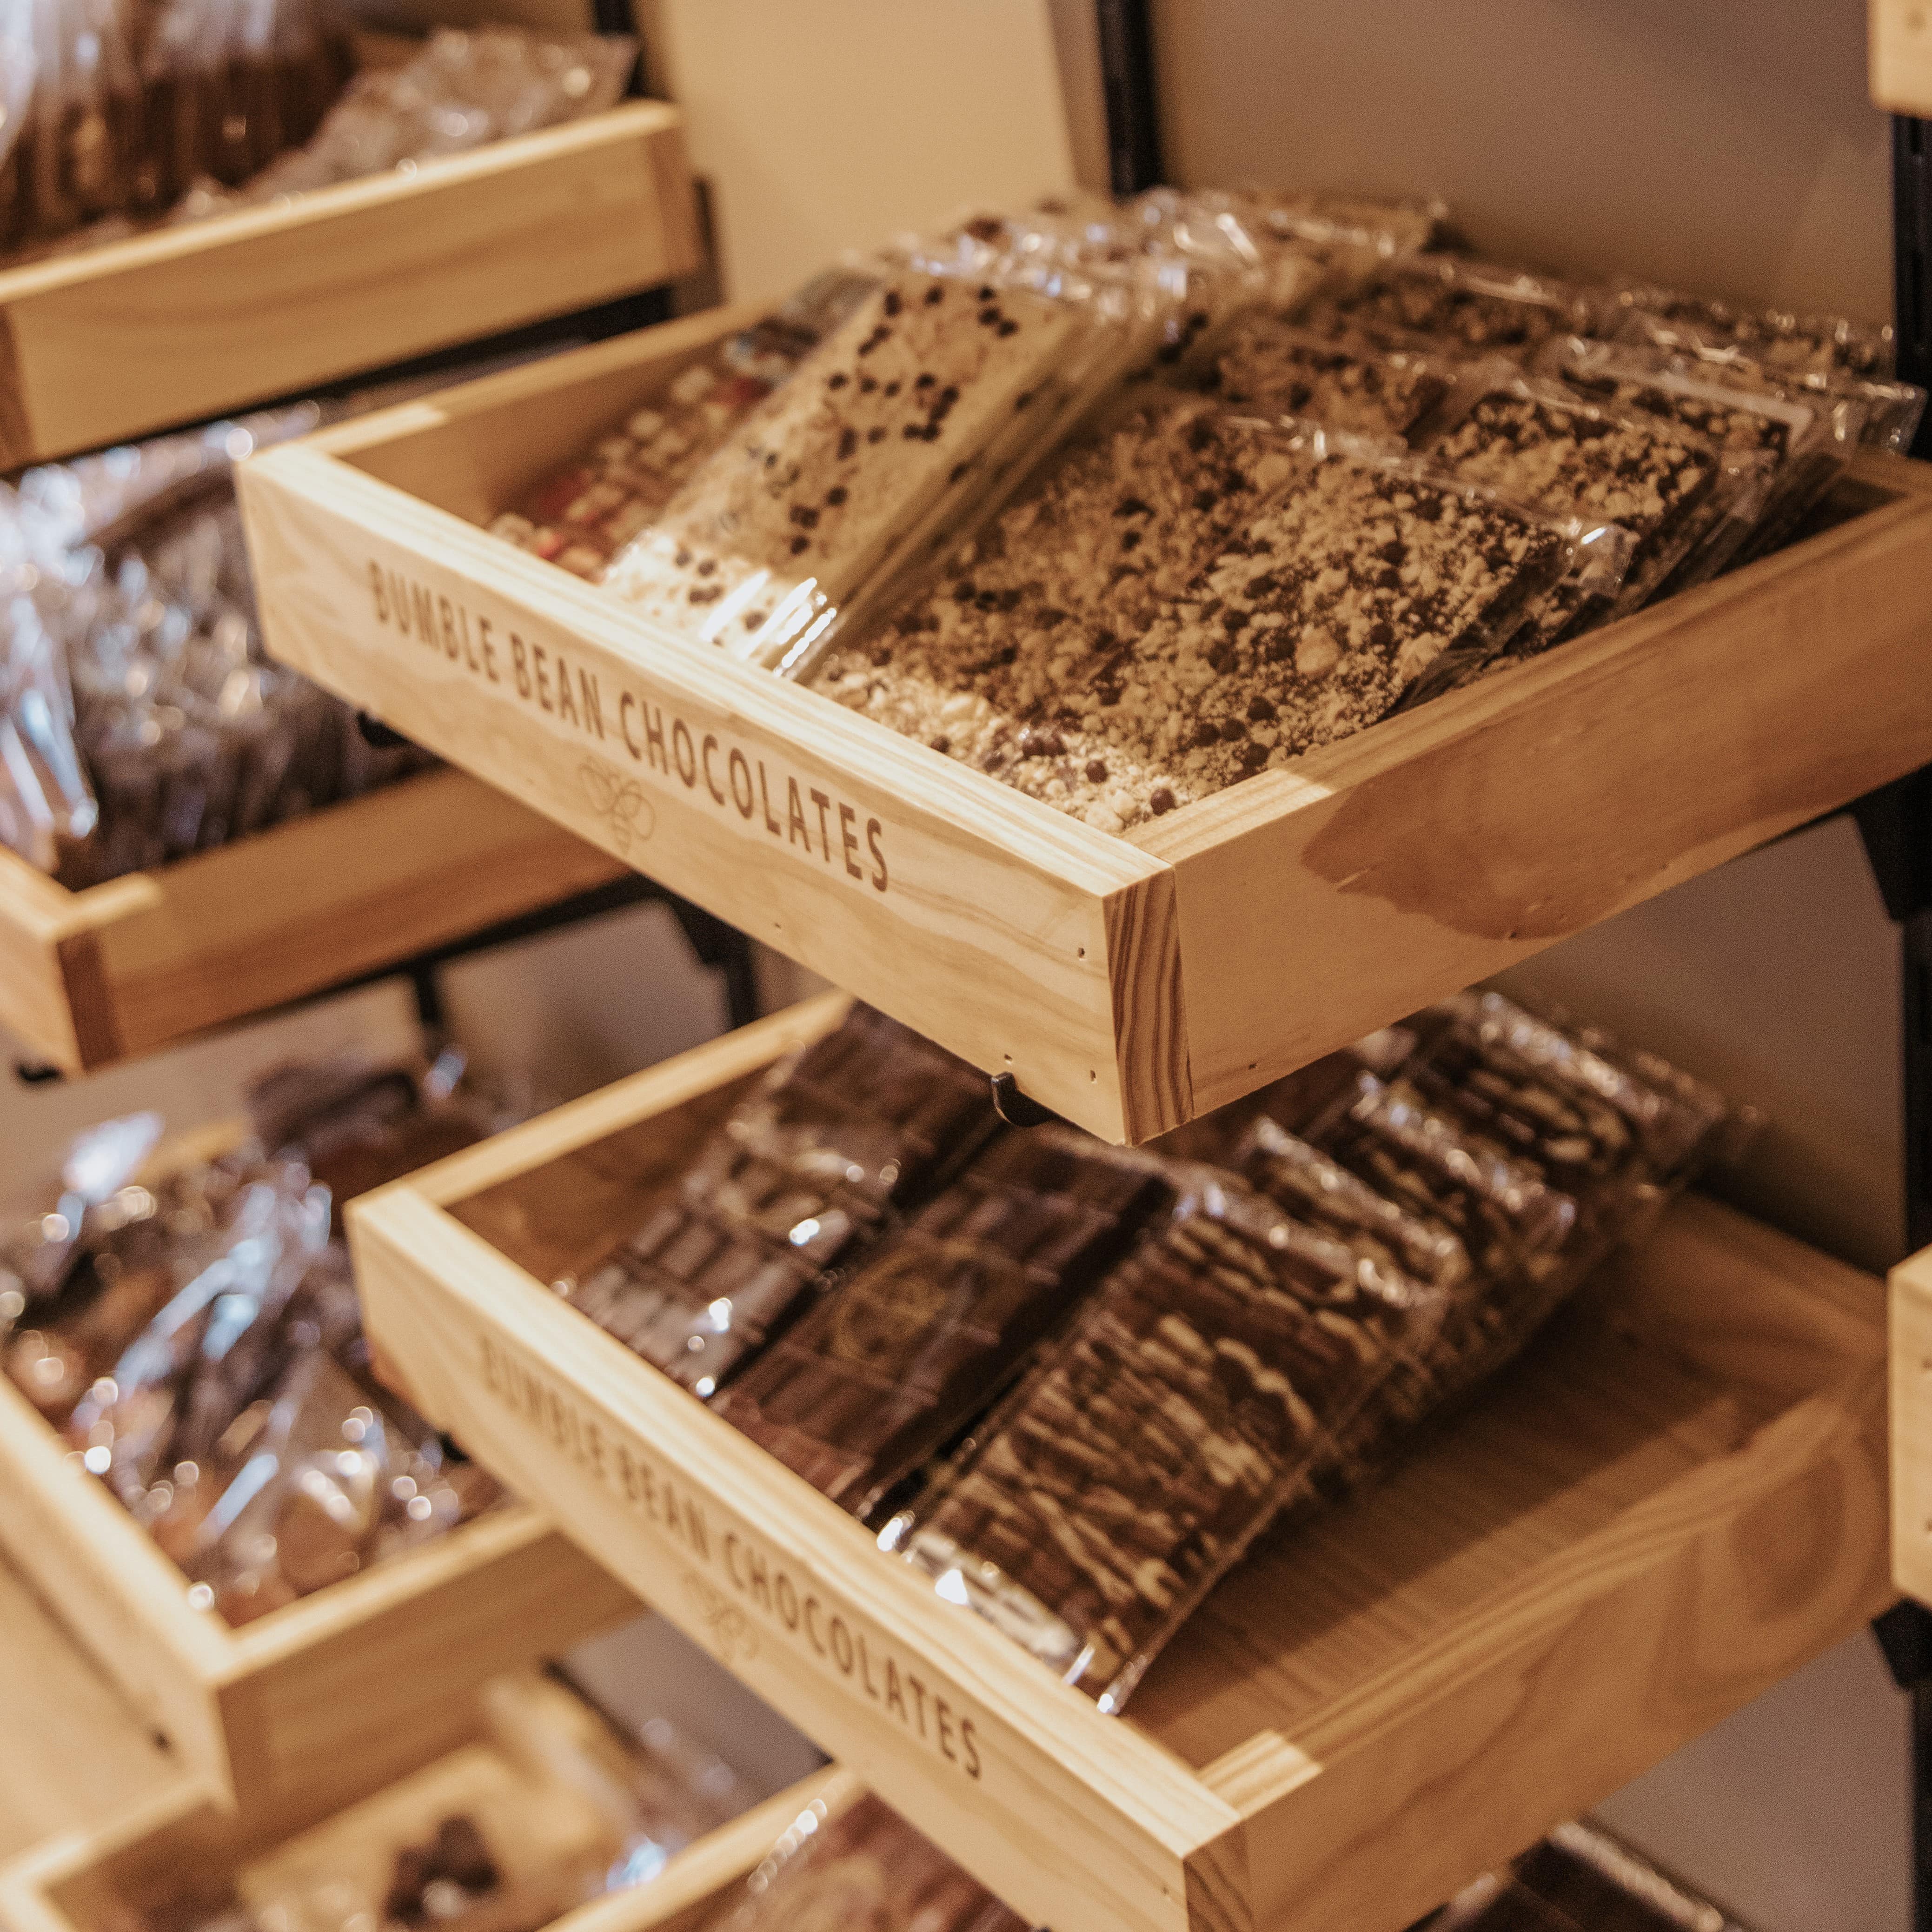 display case filled with brumble bean chocolates